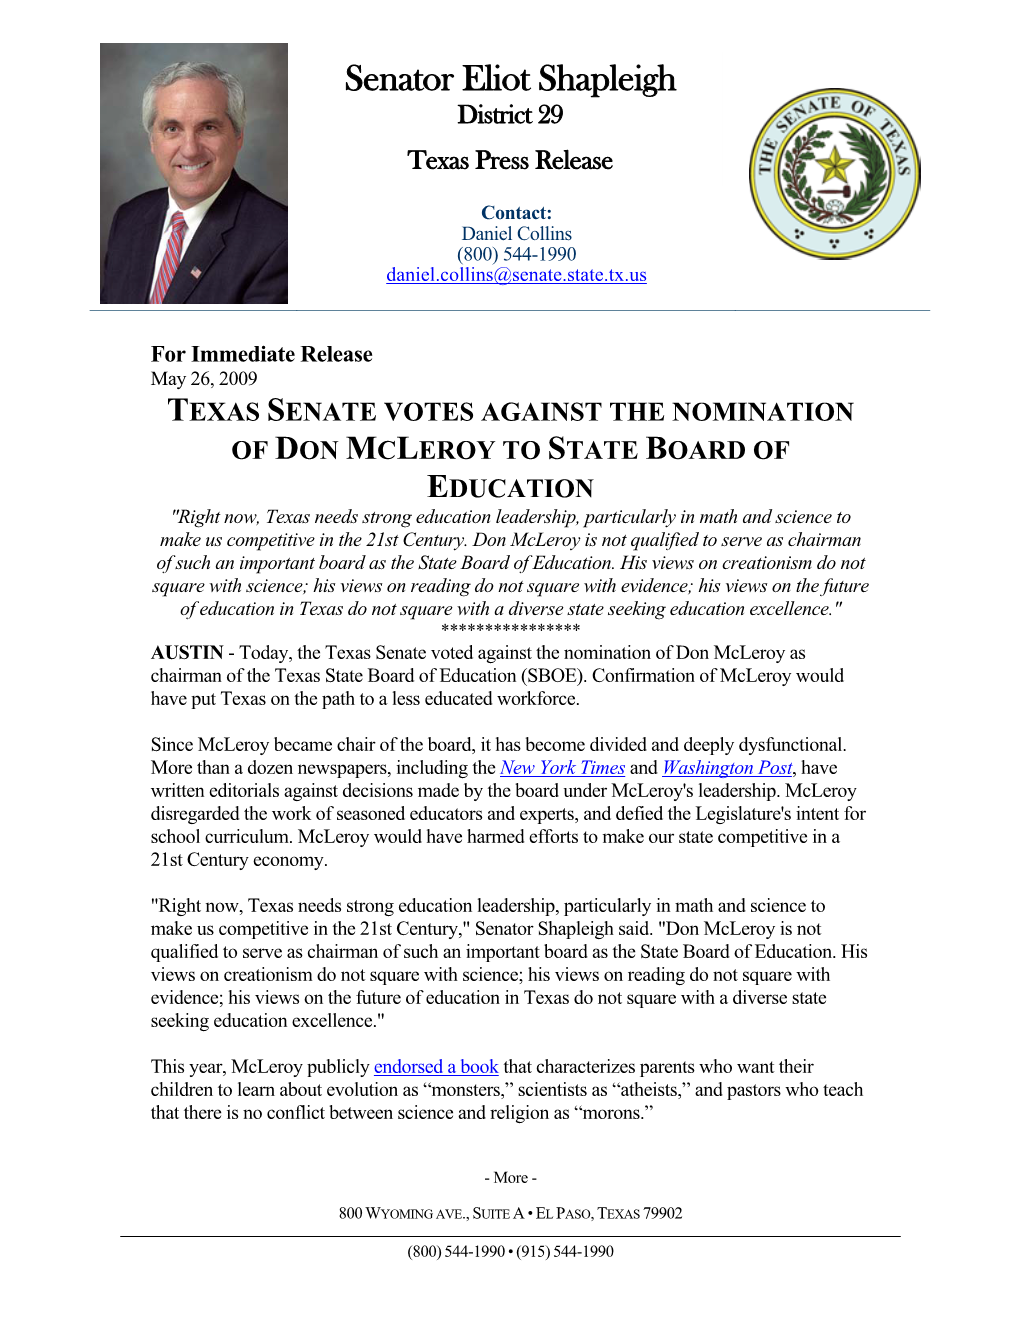 Texas Senate Votes Against the Nomination of Don Mcleroy to State